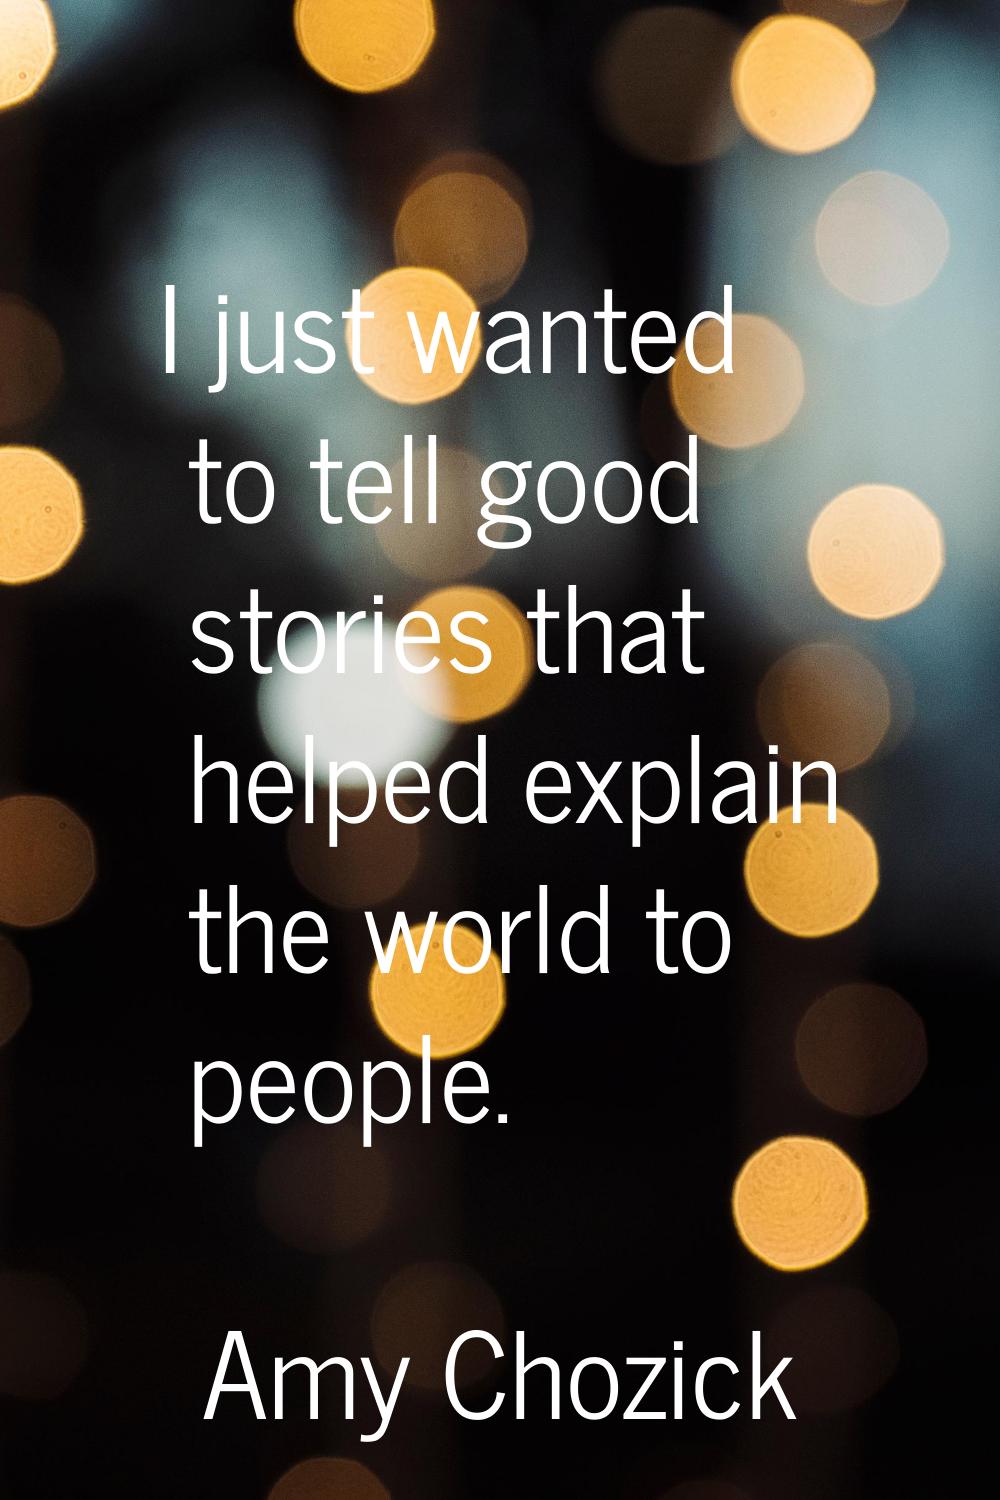 I just wanted to tell good stories that helped explain the world to people.